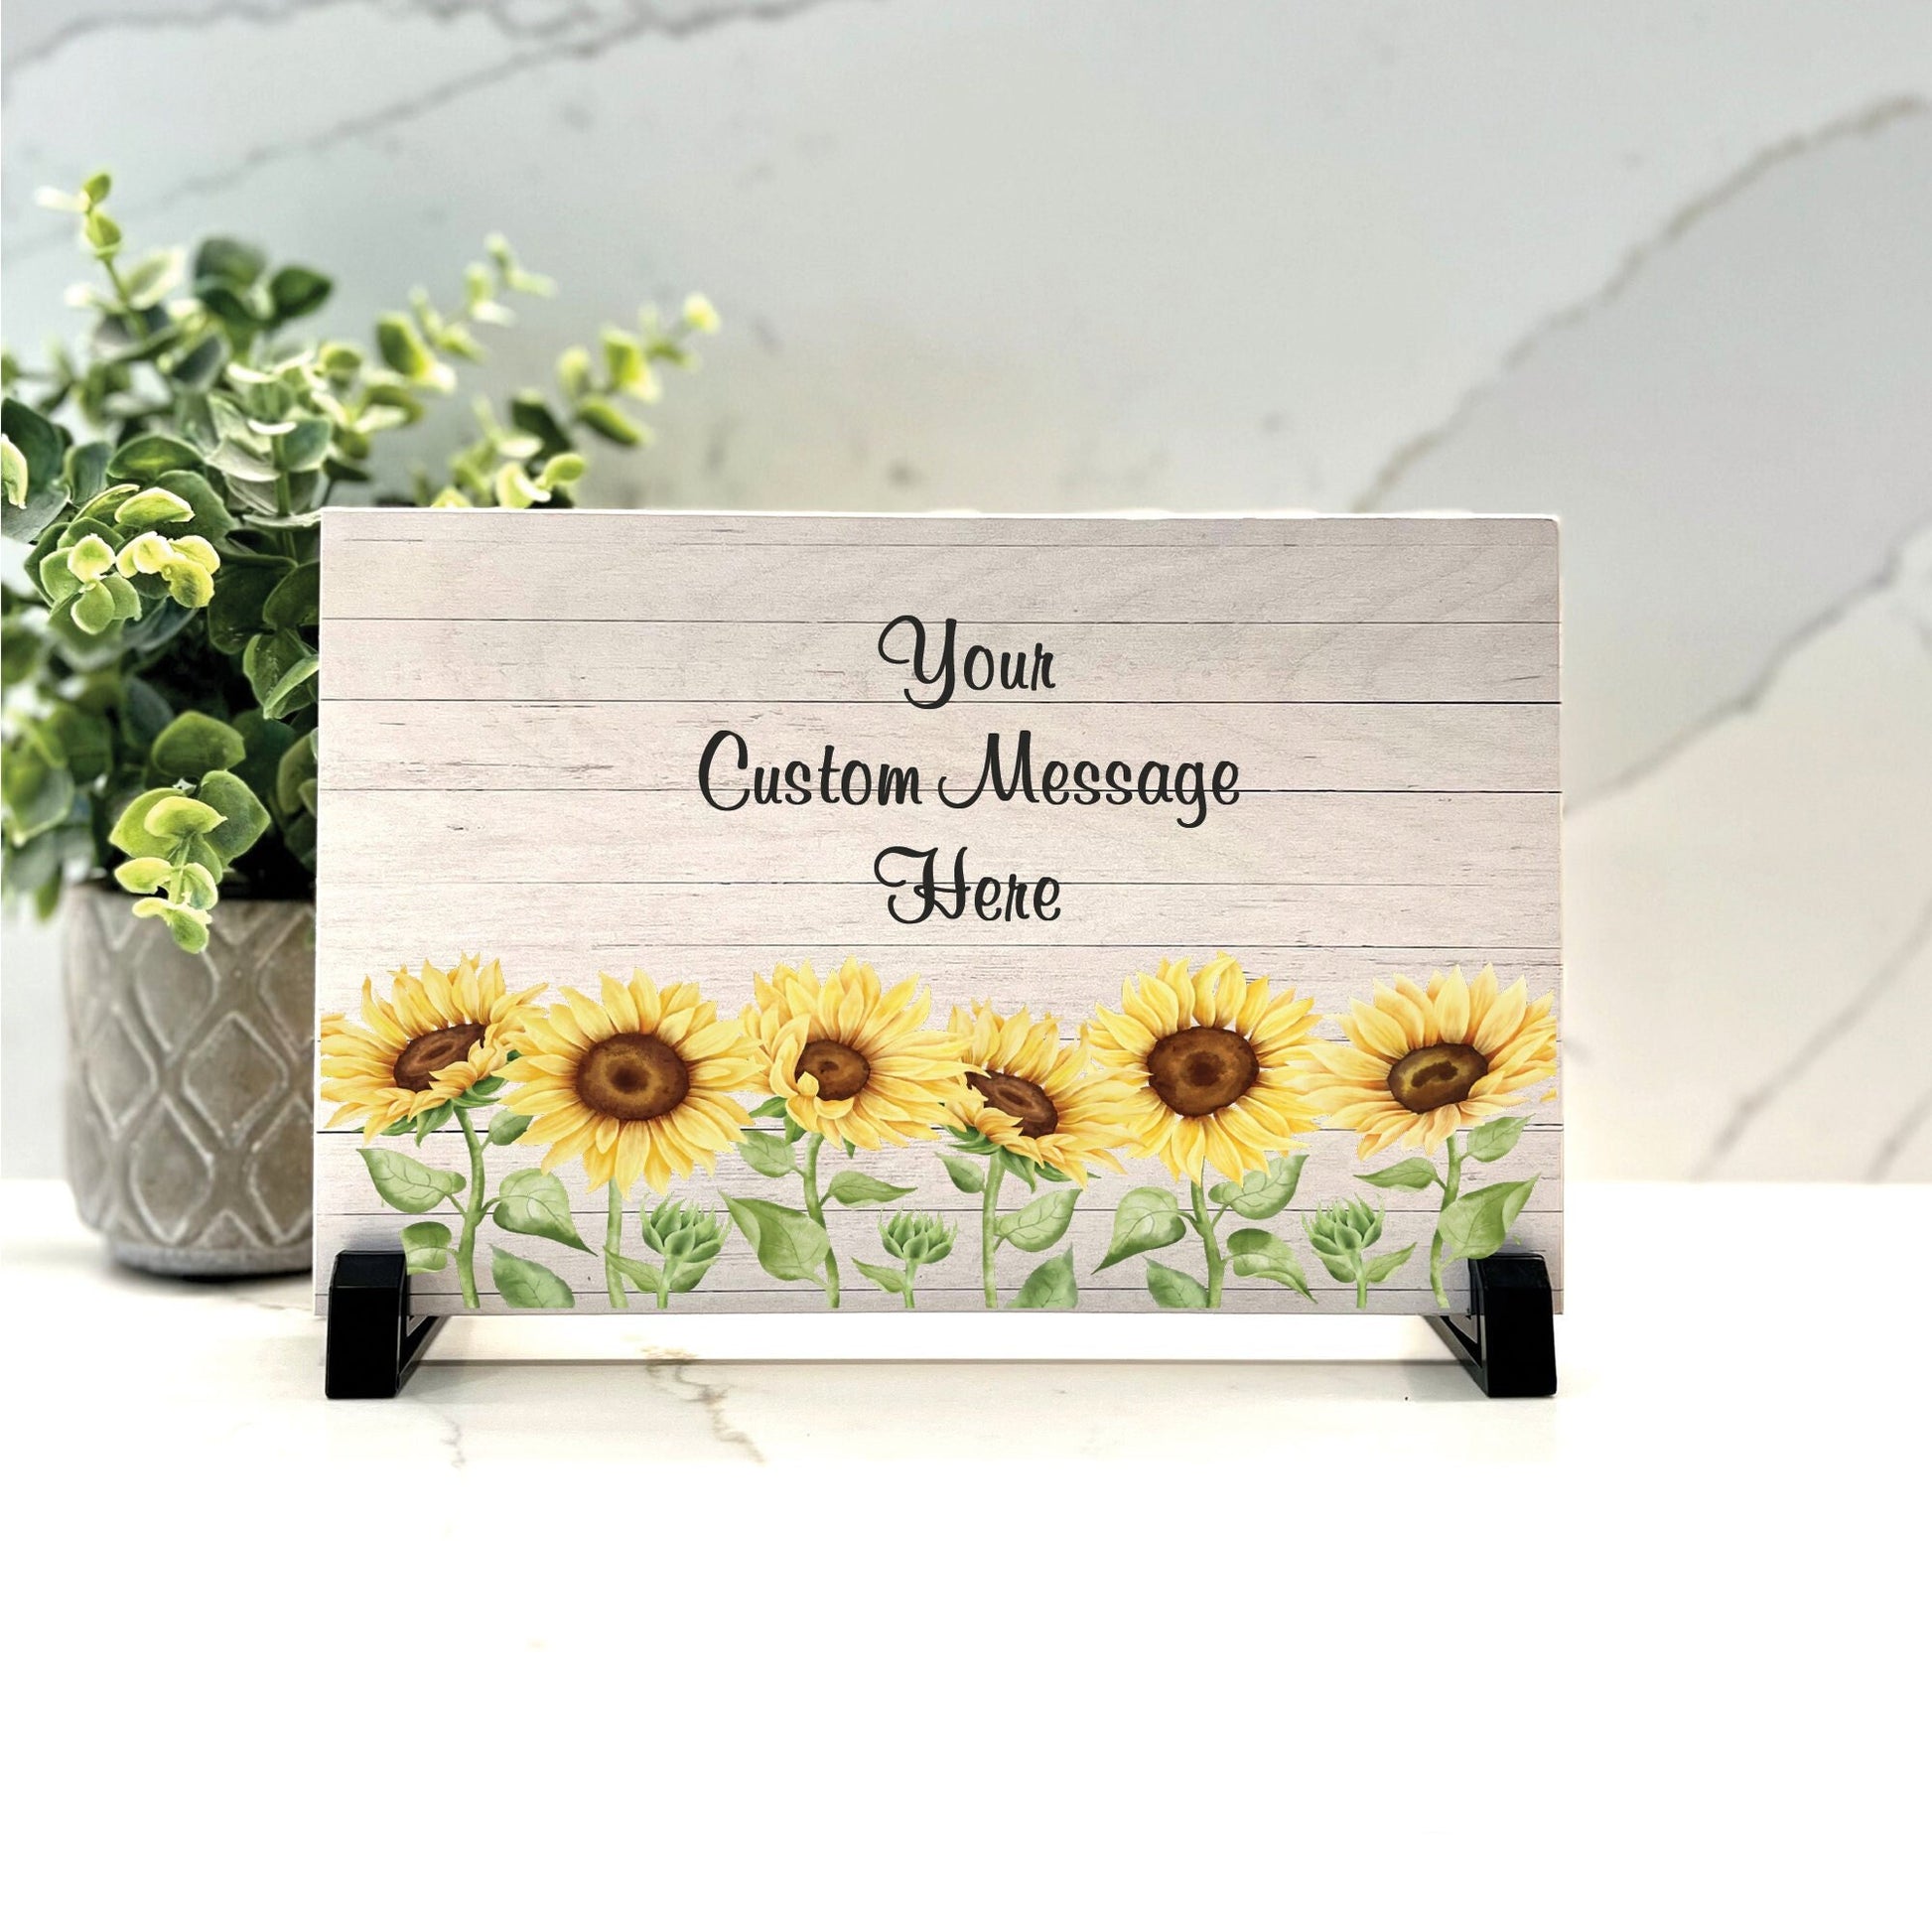 Personalized Sunflower Sign - Custom 8.5"x5.5" Wood Sign with stand, Choice of Wording & Font, Personalized Sunflower Gift